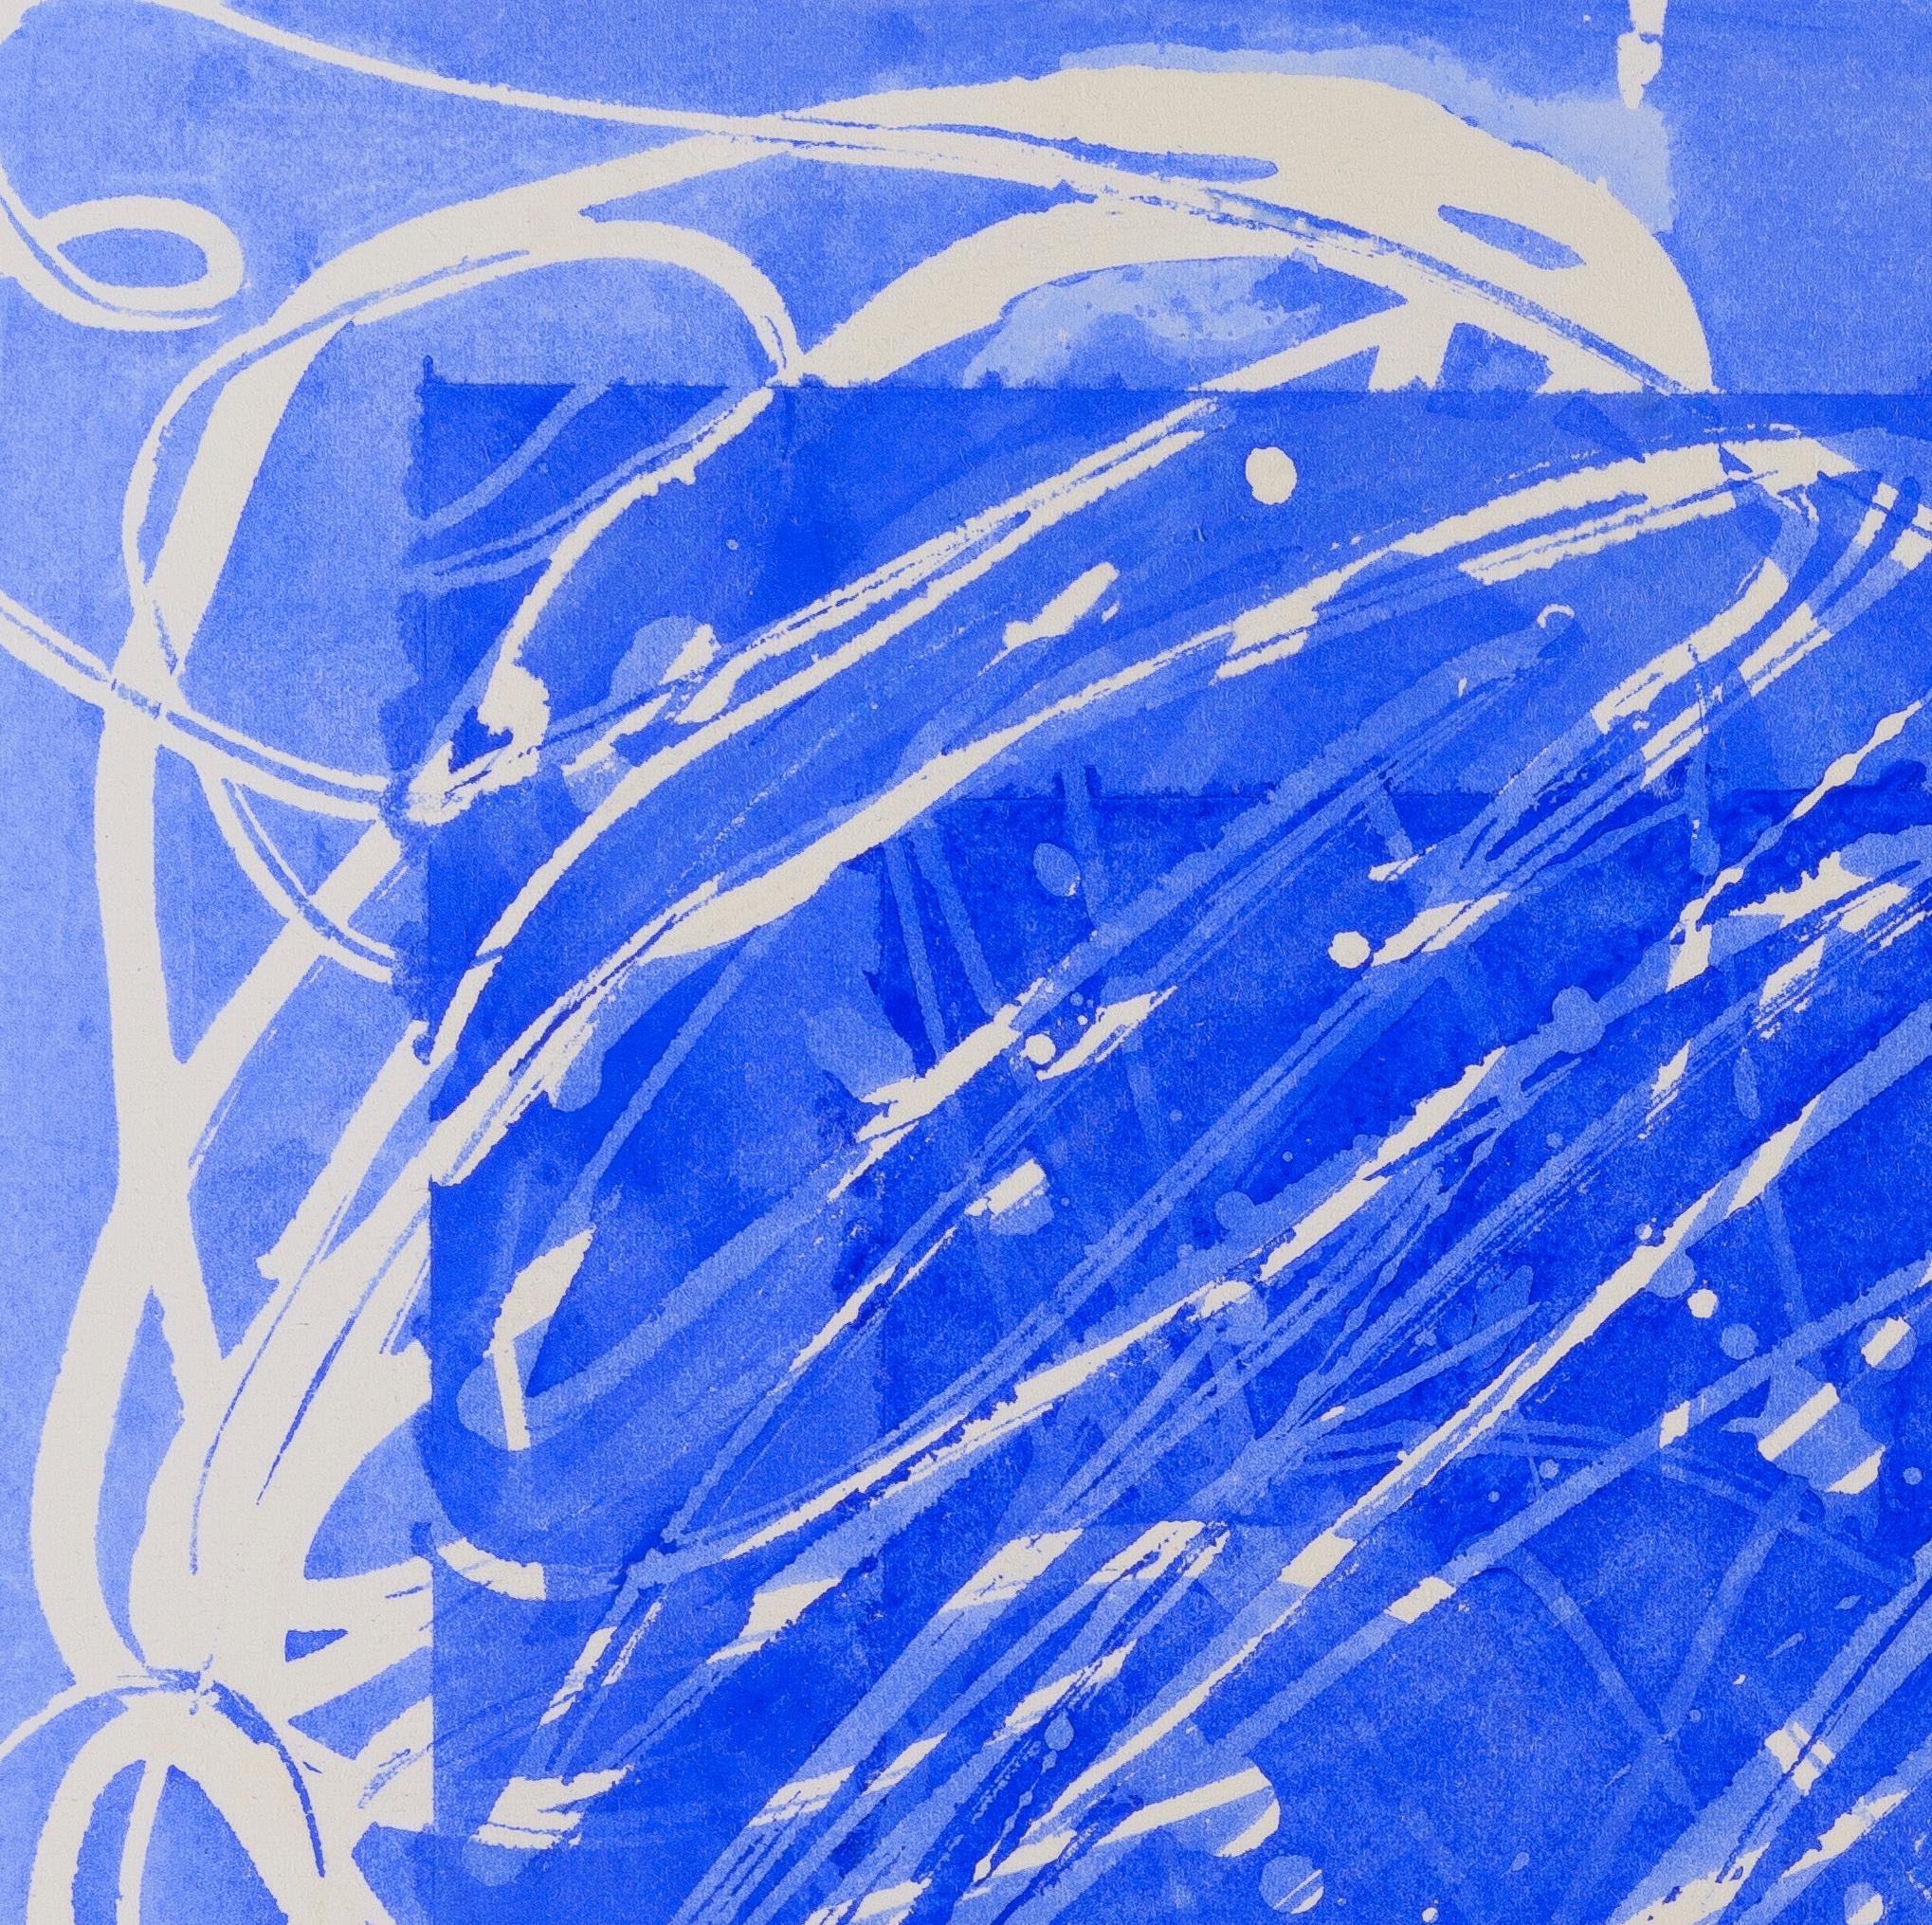 Gilded: abstract expressionist blue & white painting/drawing on paper, framed - Painting by Paula Cahill